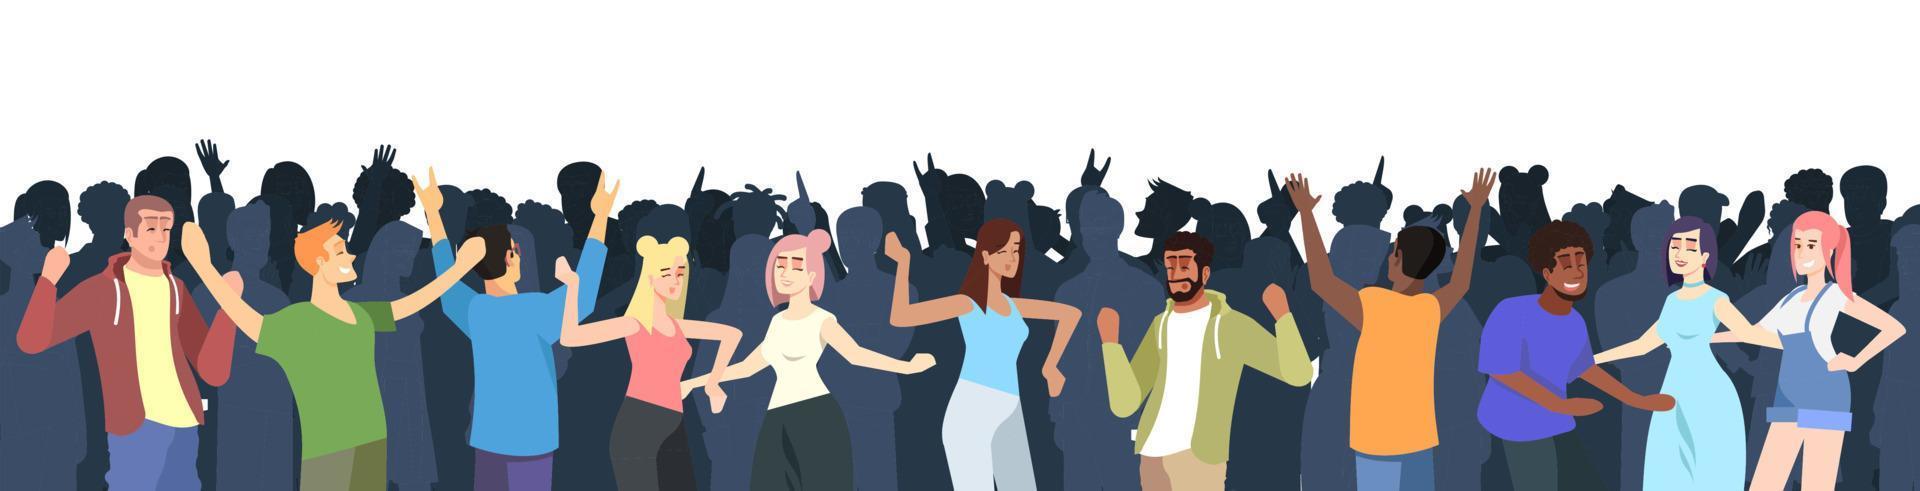 Summer music festival flat vector illustration. Crowd having fun at open air concert. Summertime pleasure outdoor activity. Dancing people isolated cartoon characters on white background